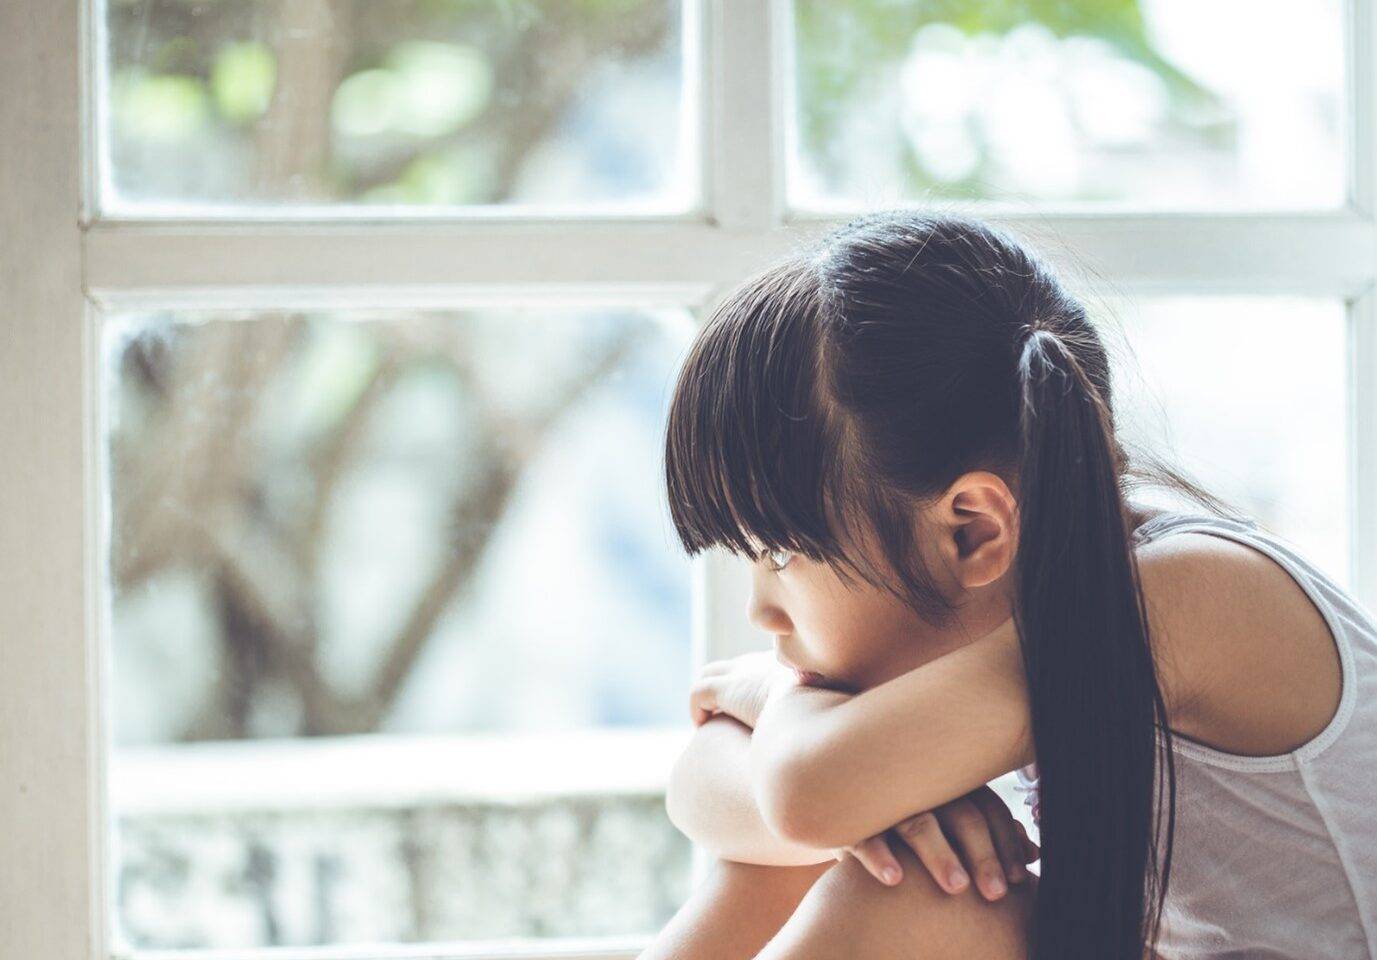 Photo of a young girl looking out of a window